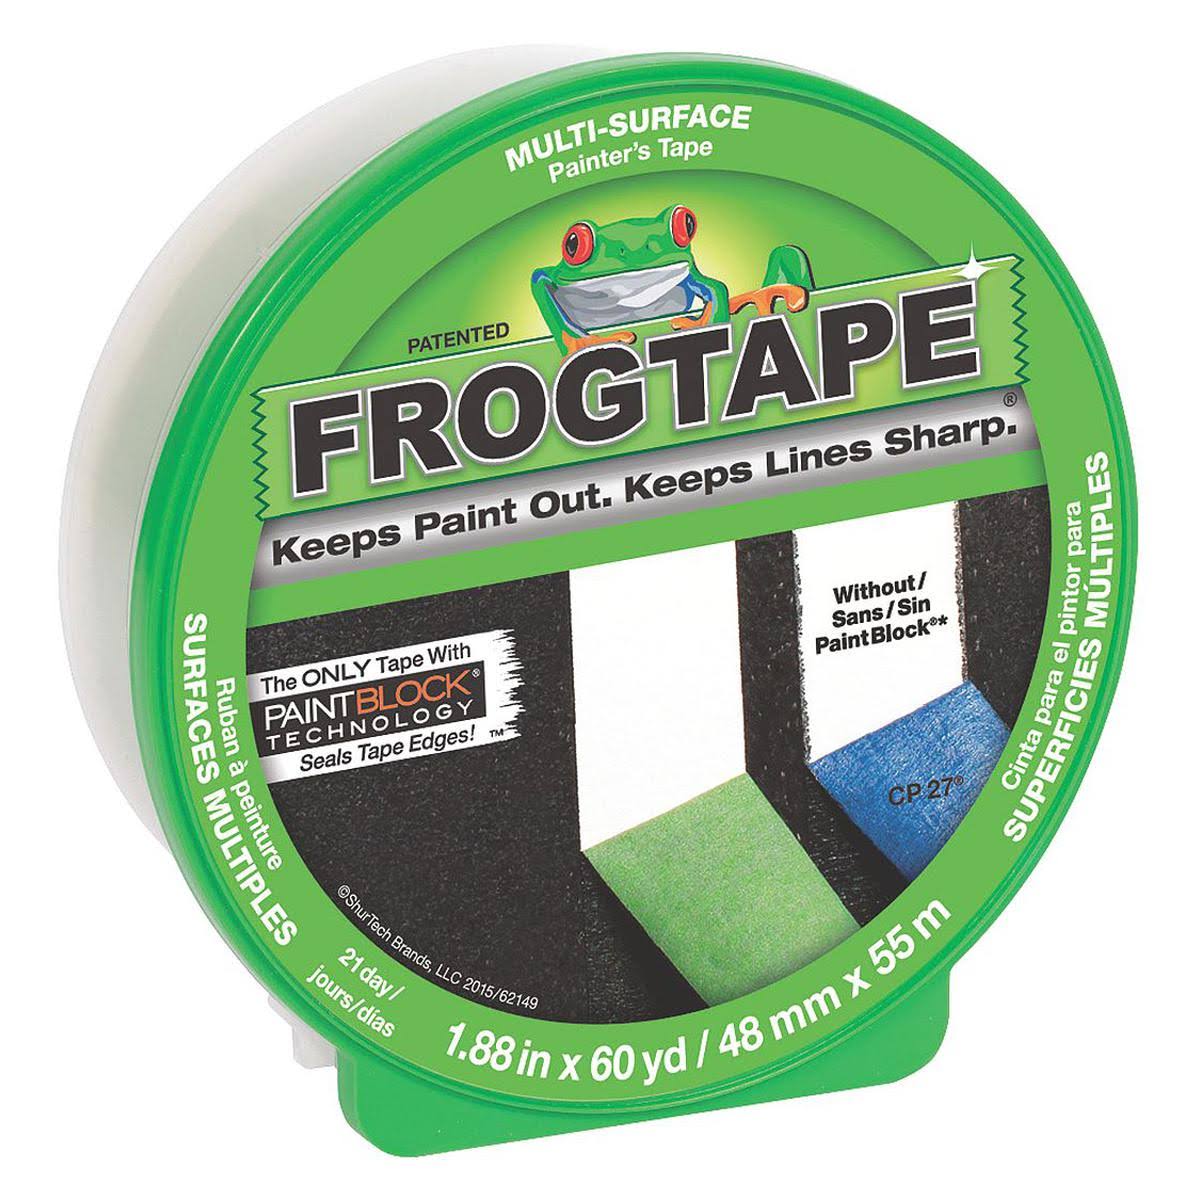 FrogTape Multi-Surface Tape - 1.88" x 60 yards